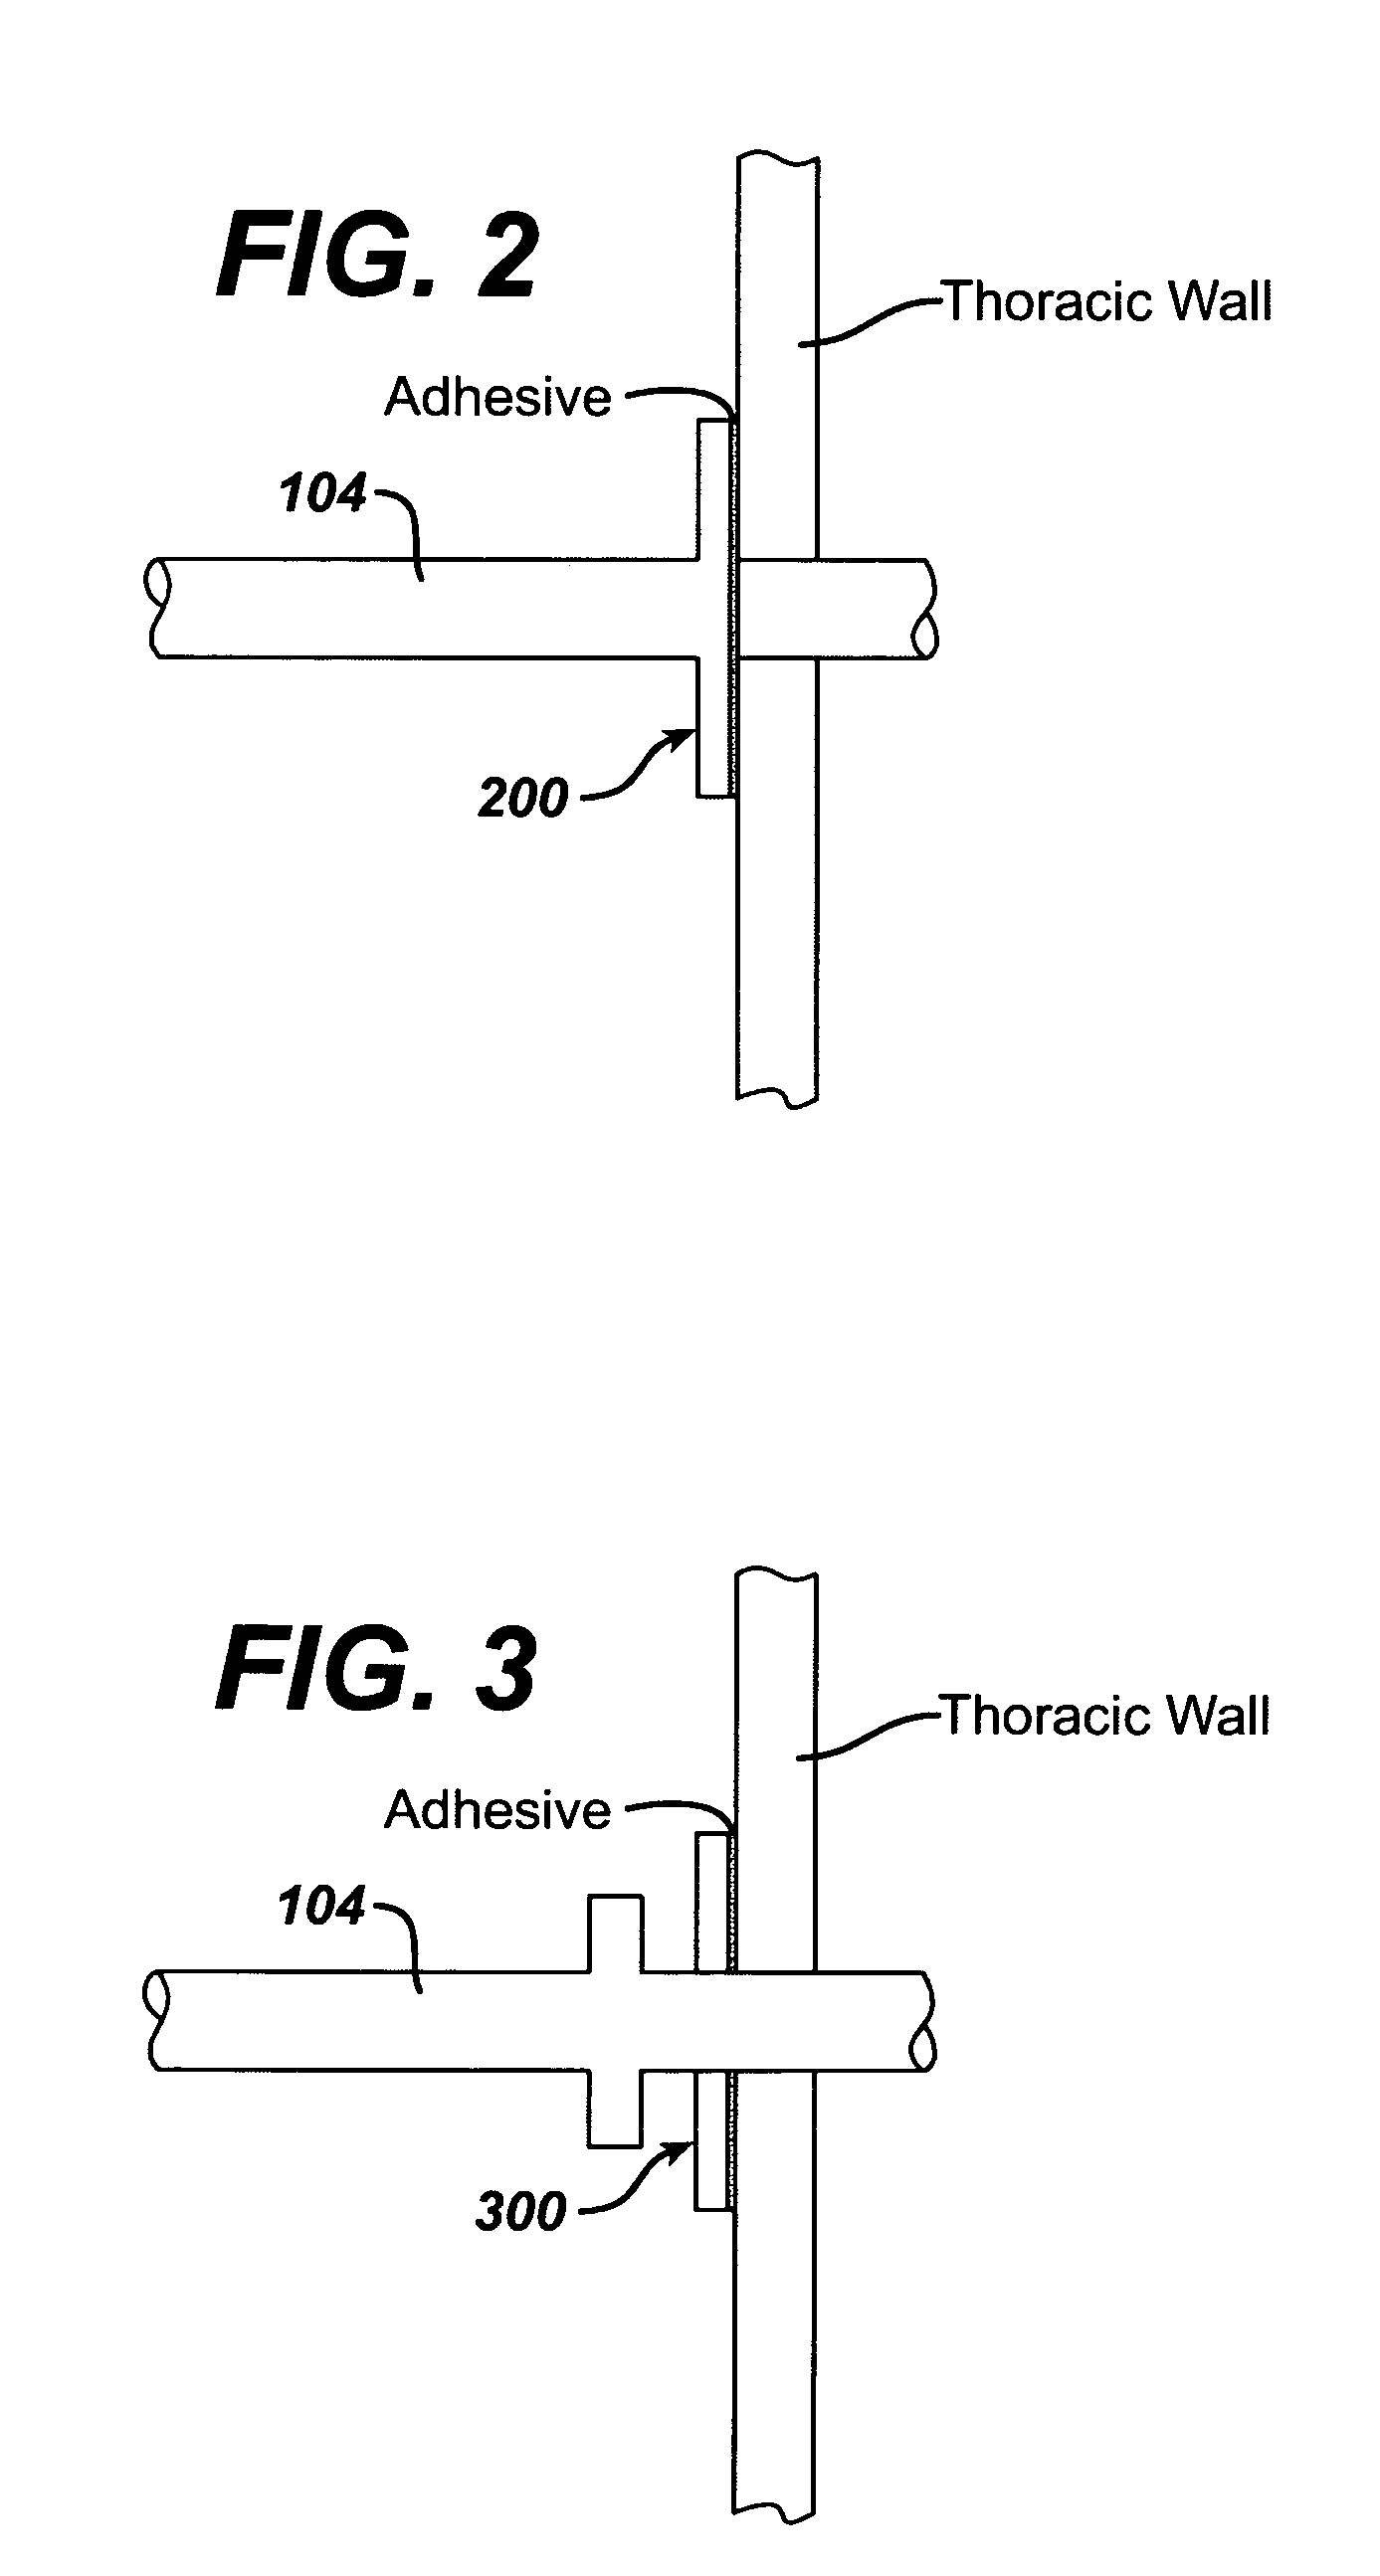 Intra-thoracic collateral ventilation bypass system and method